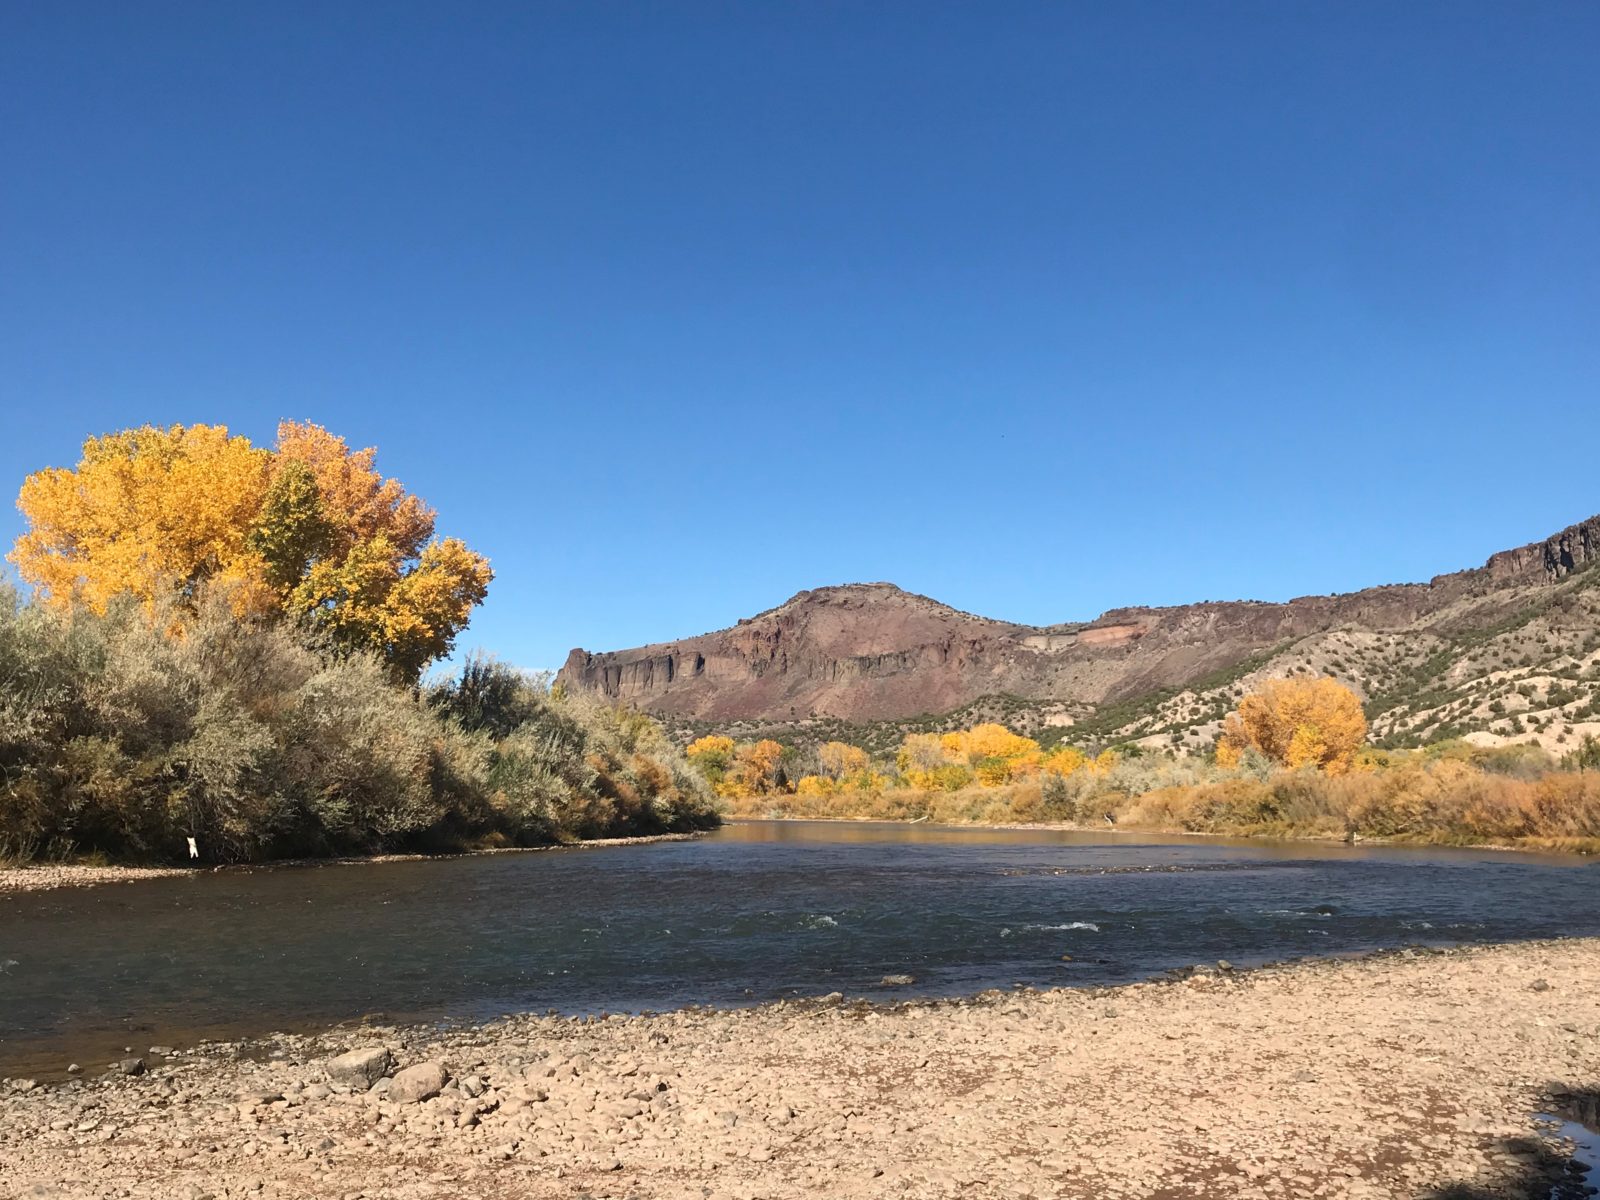 A mountain, golden trees, and a river can all be seen against a bright blue sky.